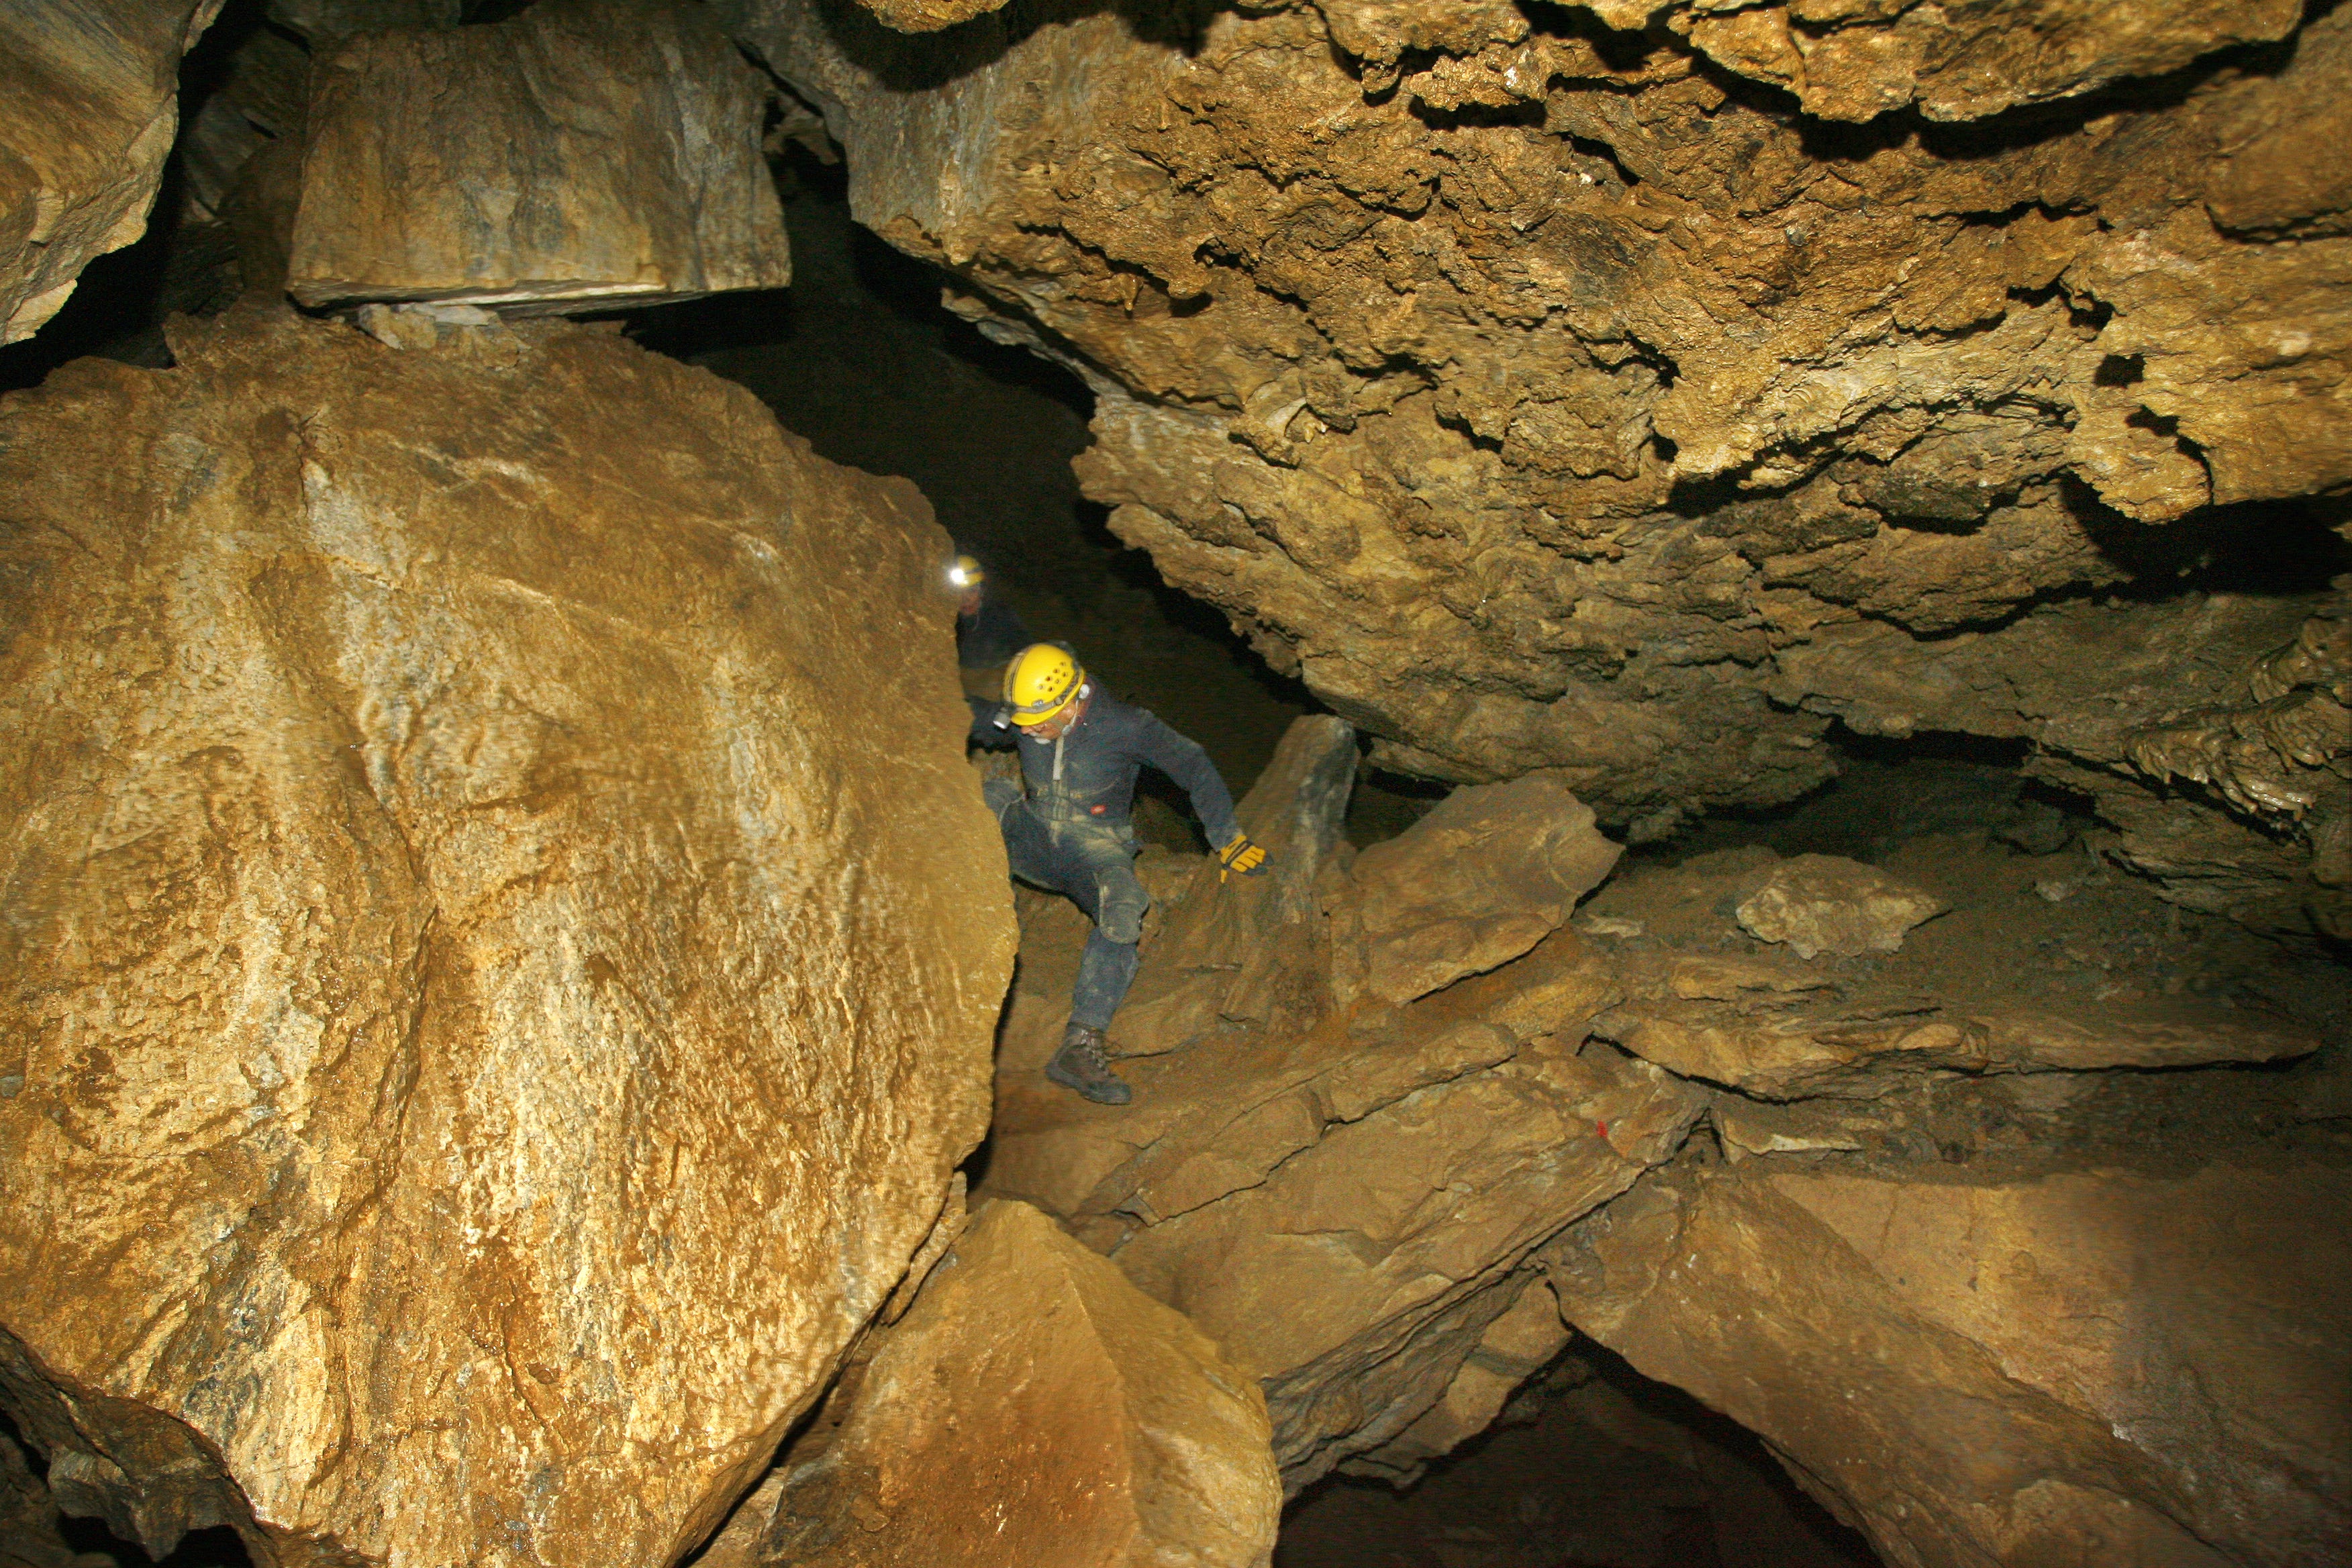 Six Things To Know About Oregon Caves Expansion